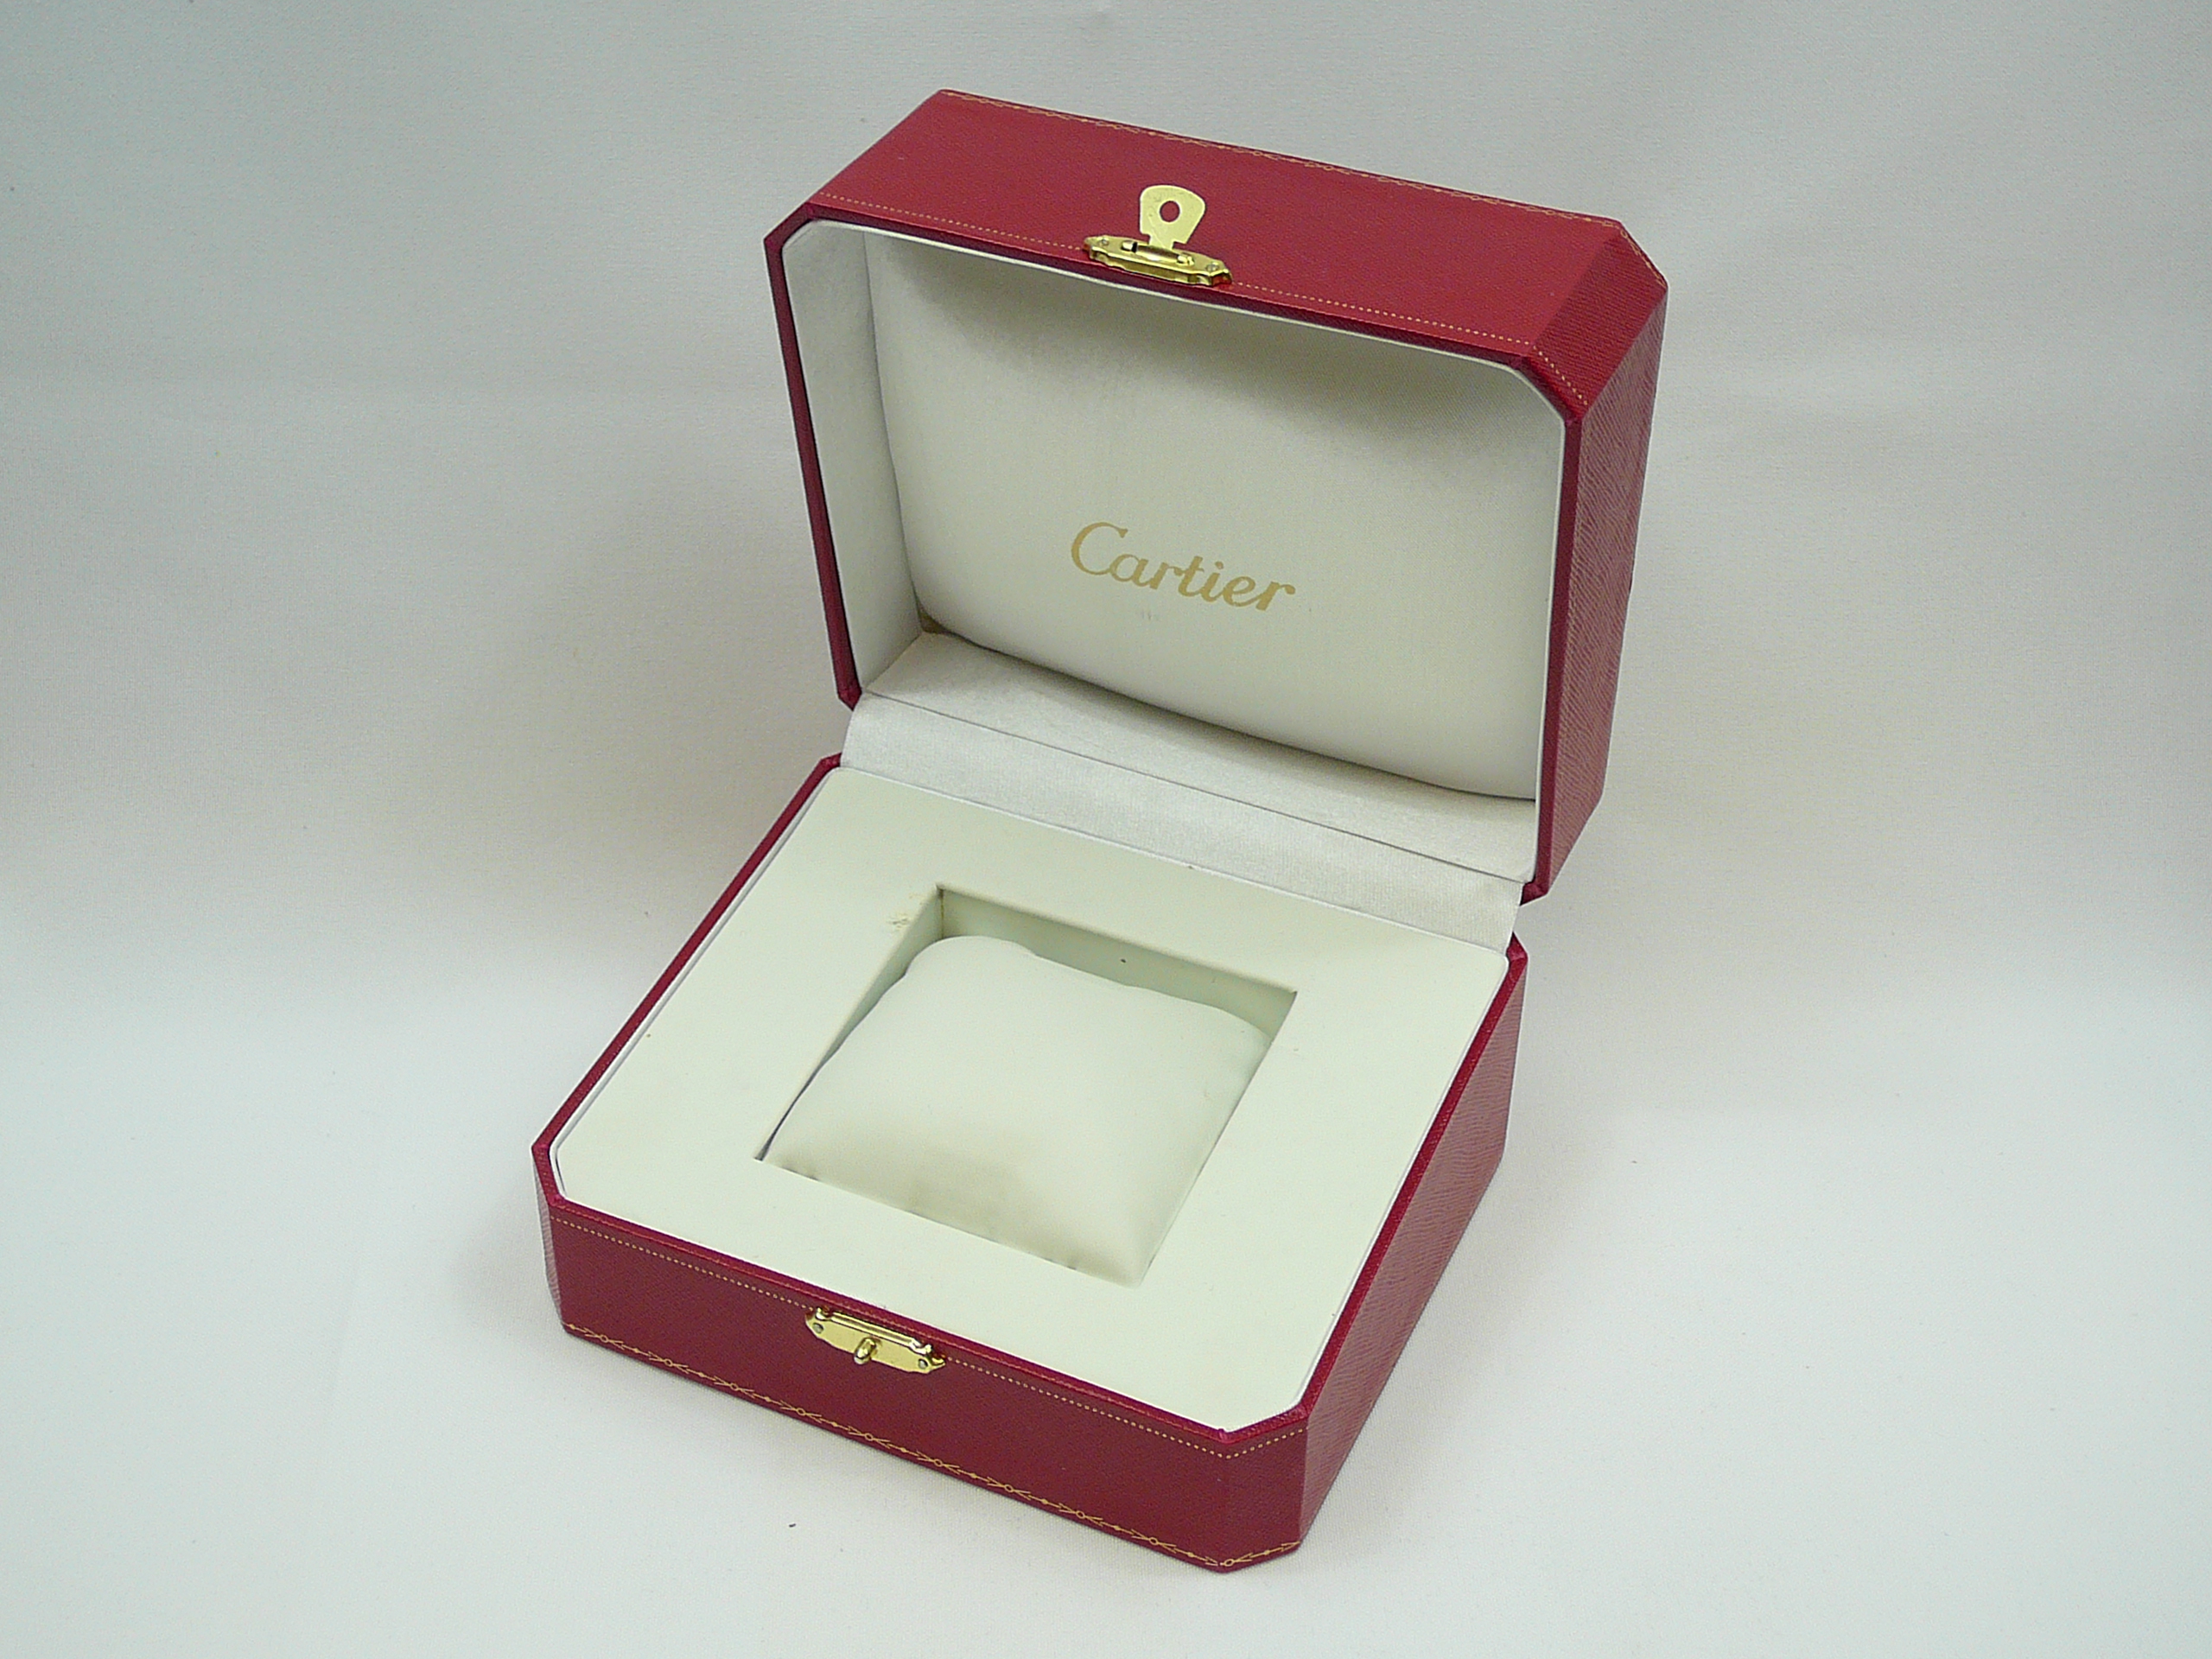 Cartier watch box - Image 2 of 2